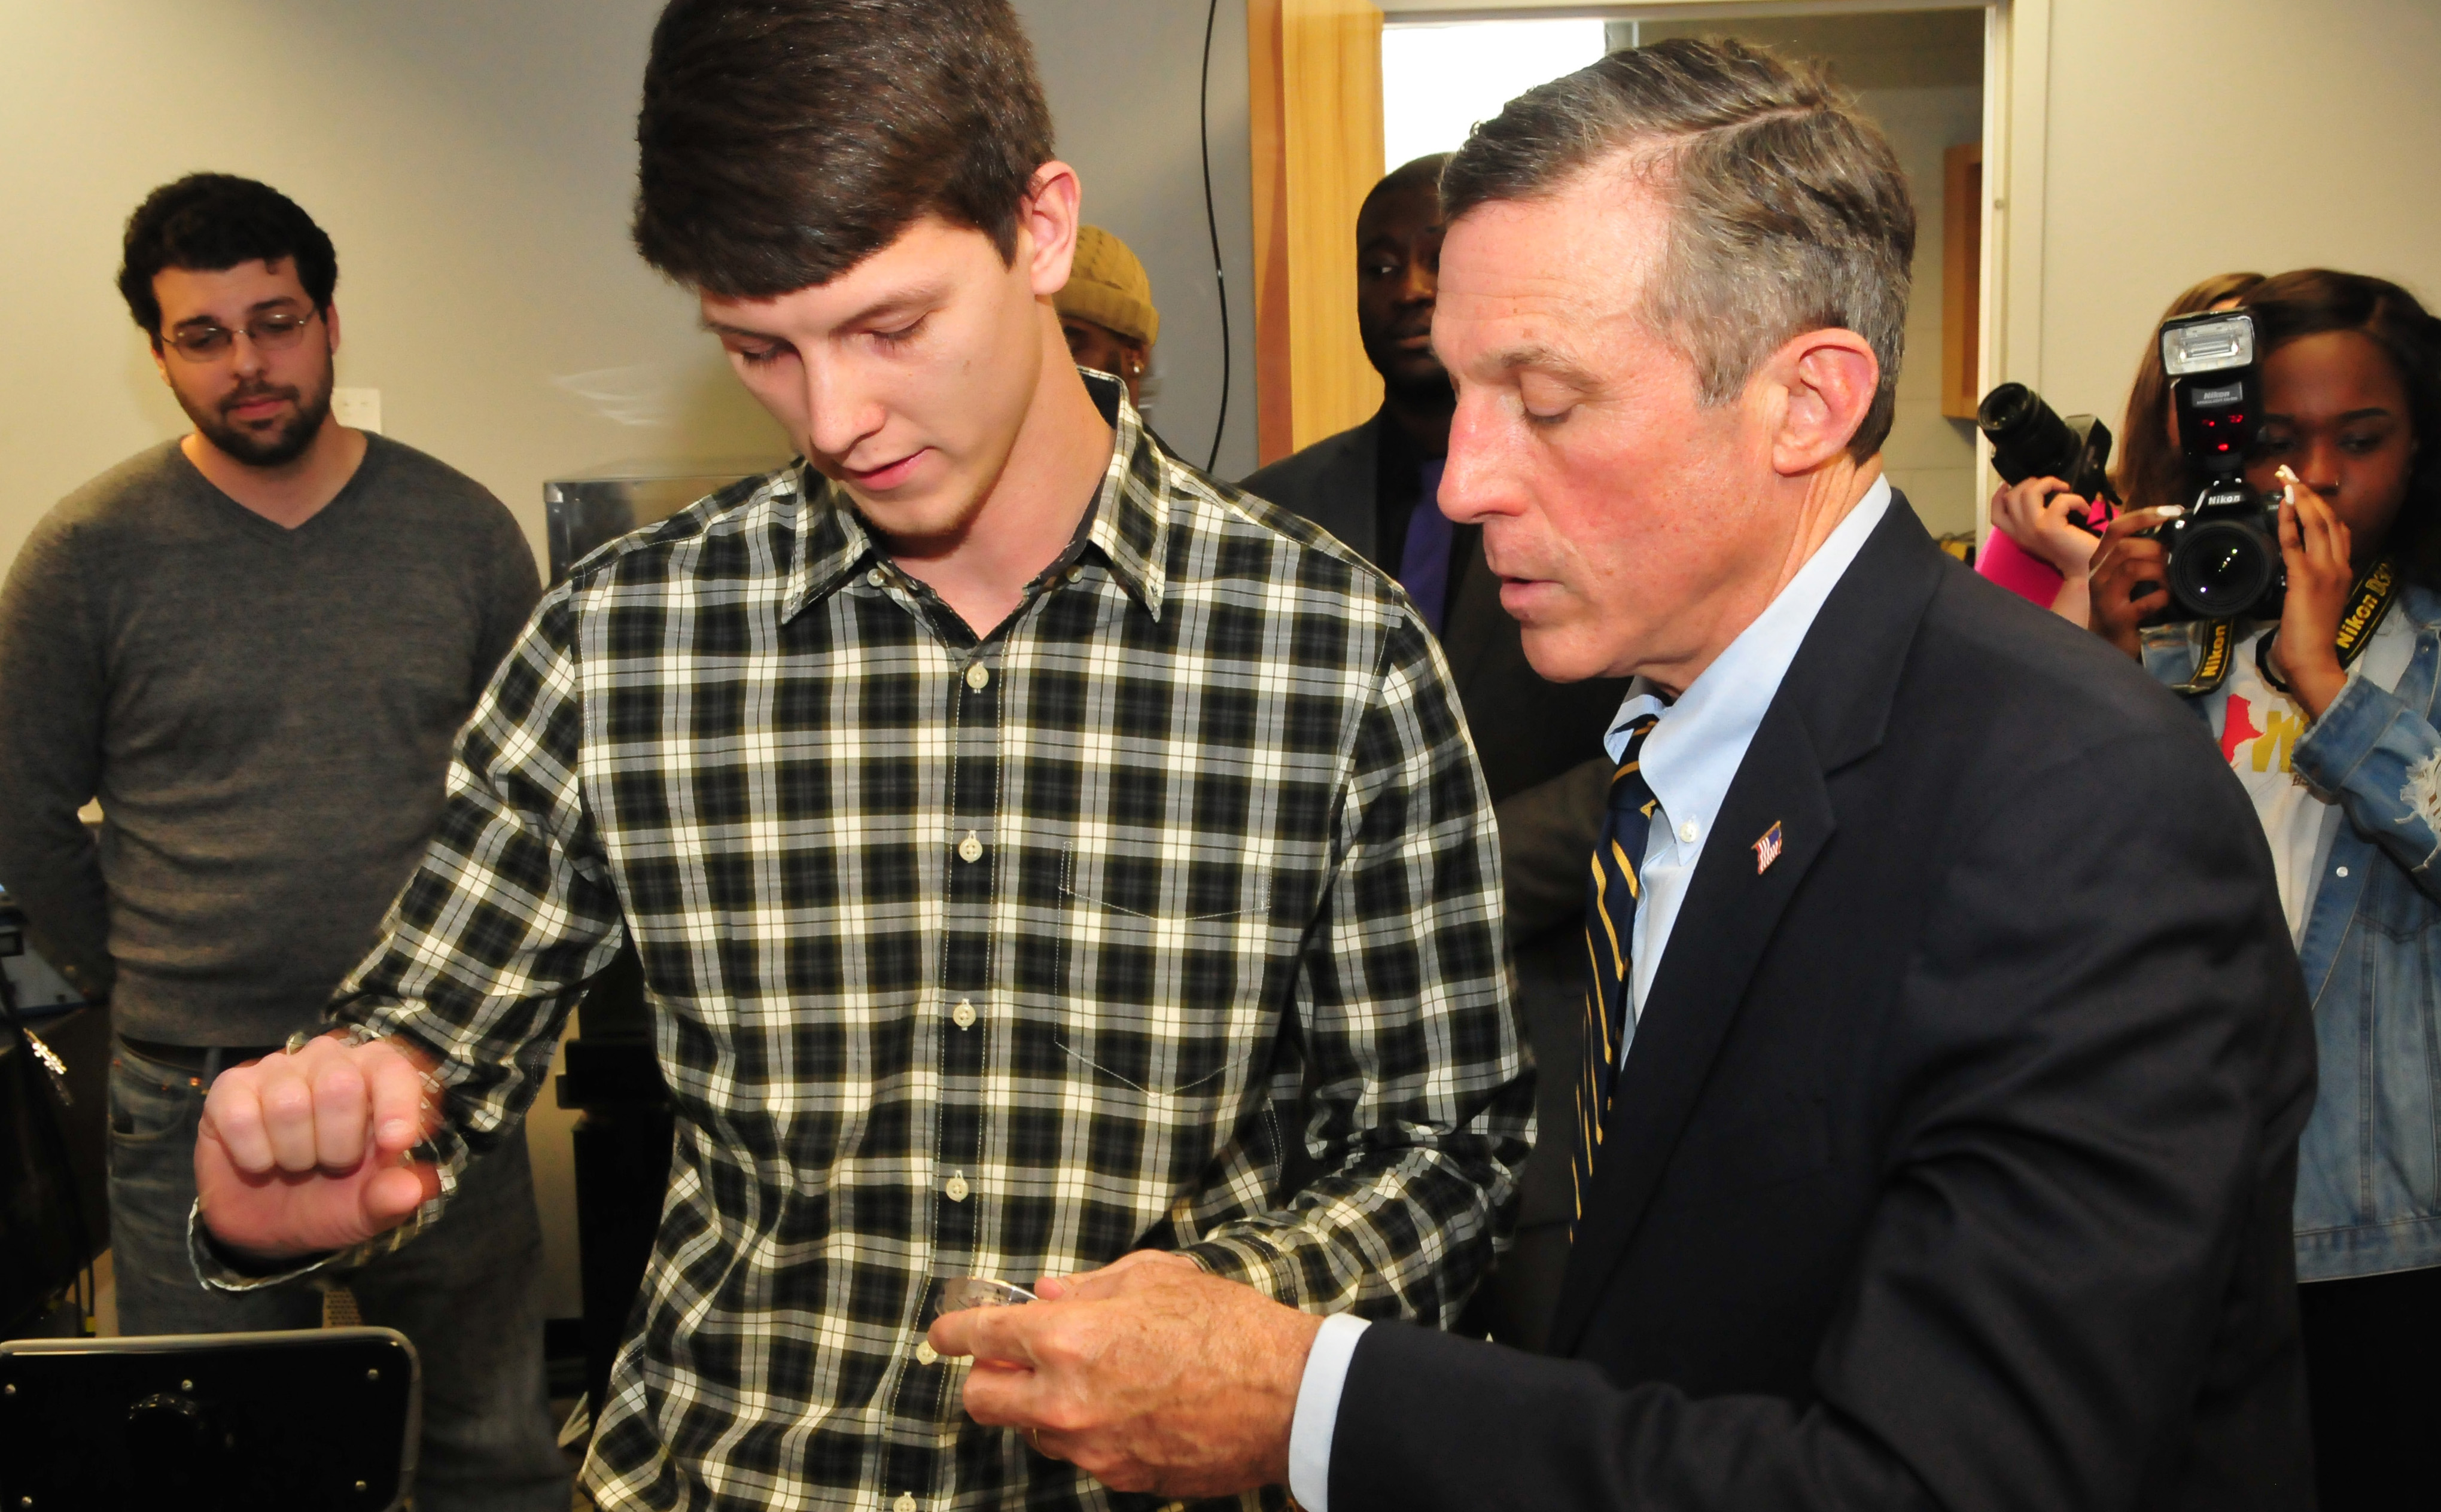 Andrew Voshell (l), graduate engineering students, shows Gov. John Carney a materials sample that is part of some current analytical research he is involved with at DSU.